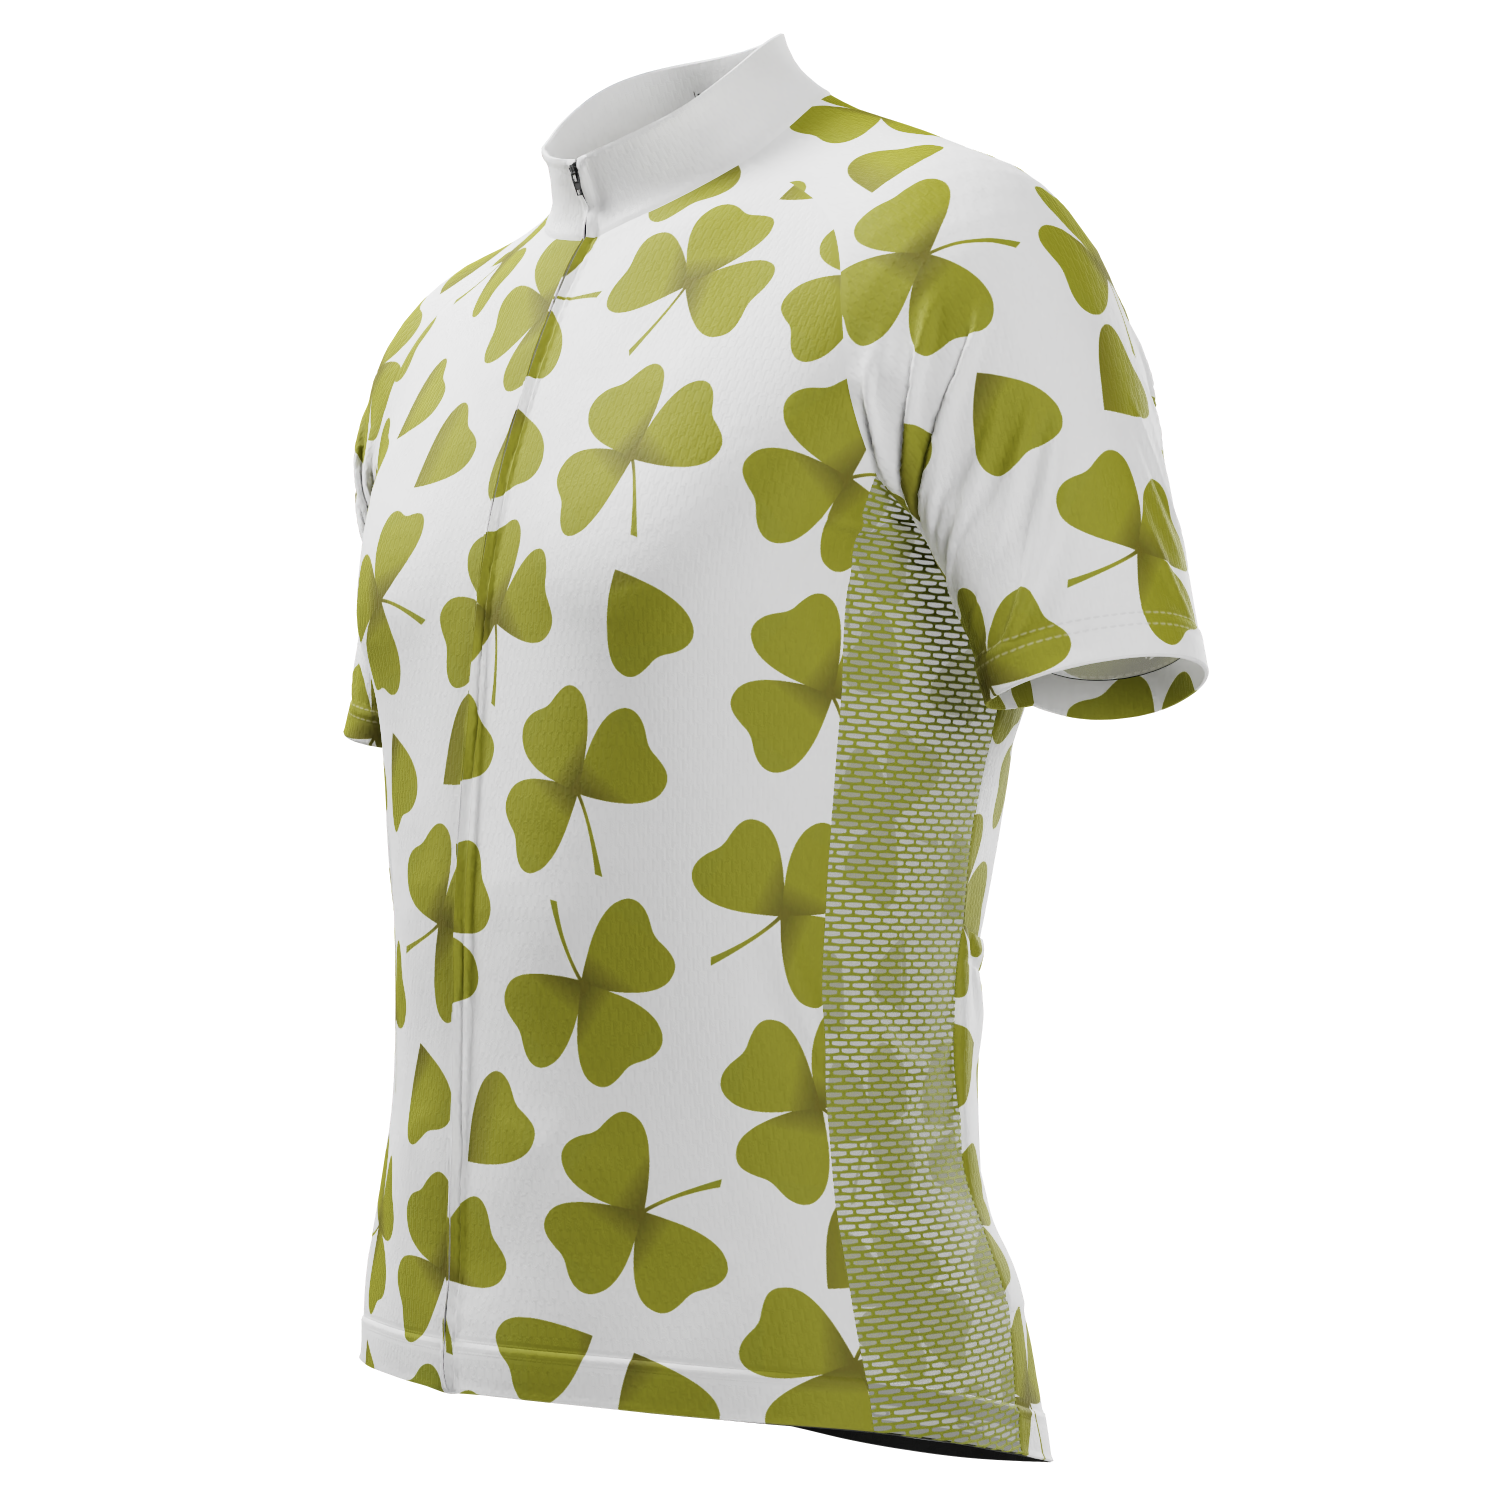 Men's Three Leaf Clover Short Sleeve Cycling Jersey